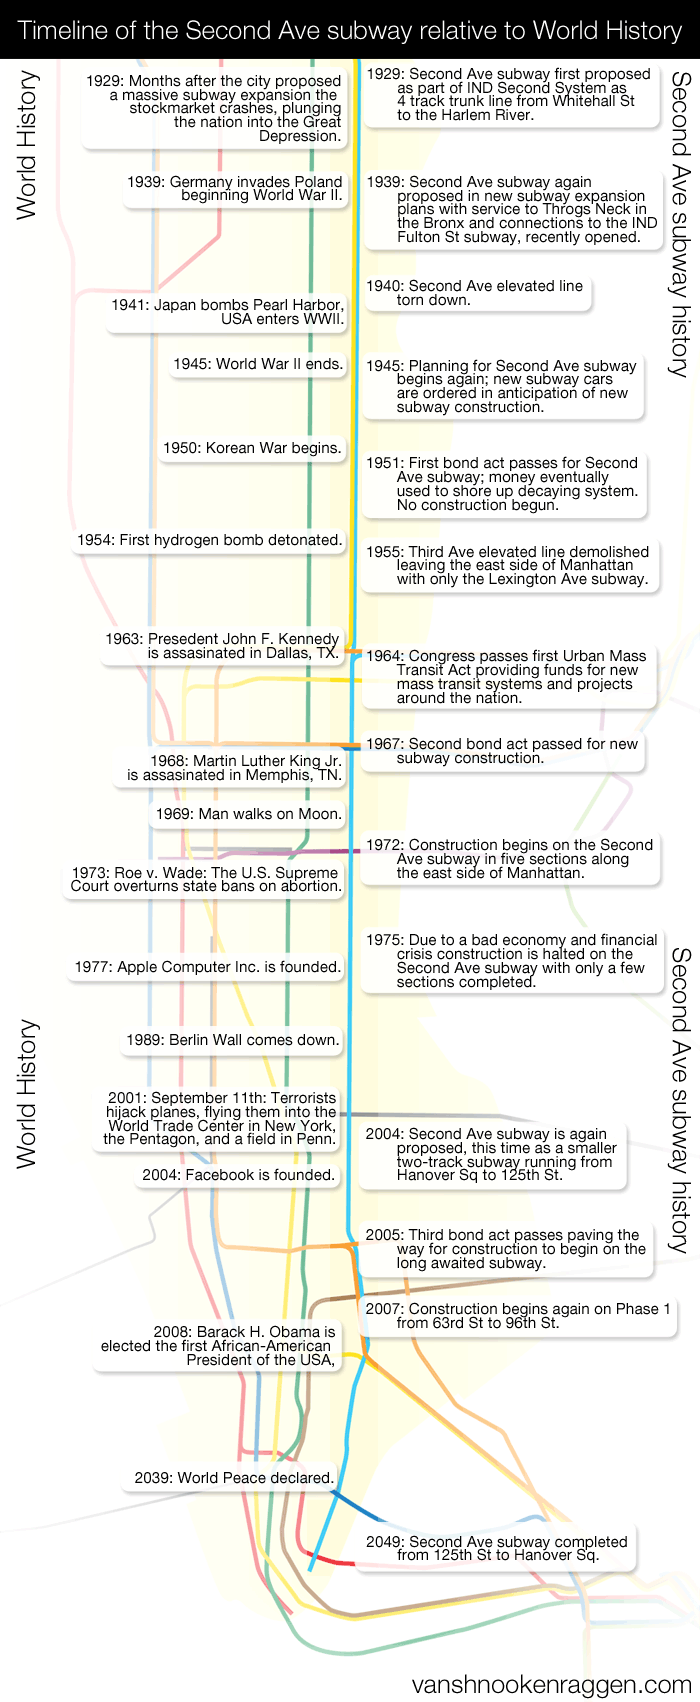 Timeline of the Second Ave subway relative to World History.